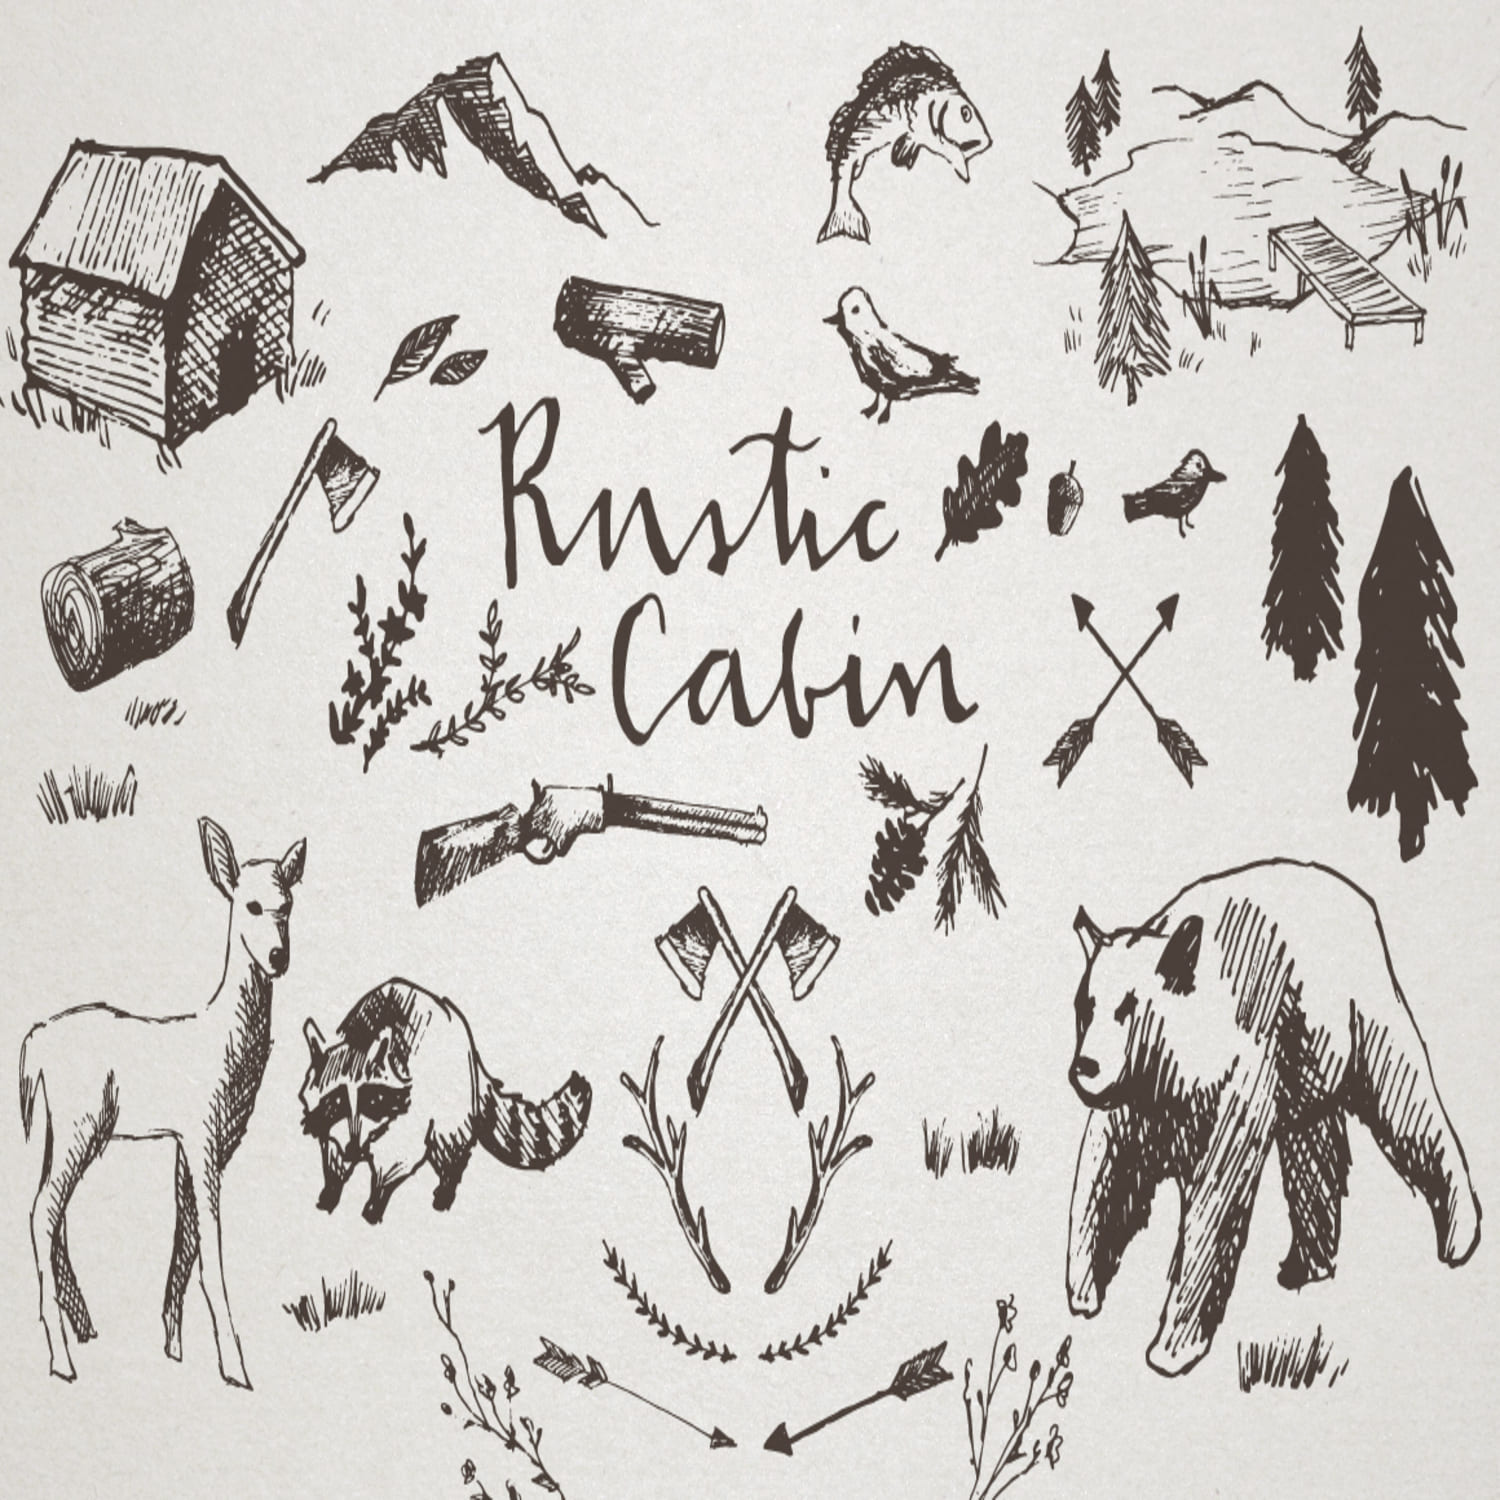 Rustic Cabin Crosshatch Sketches main cover.